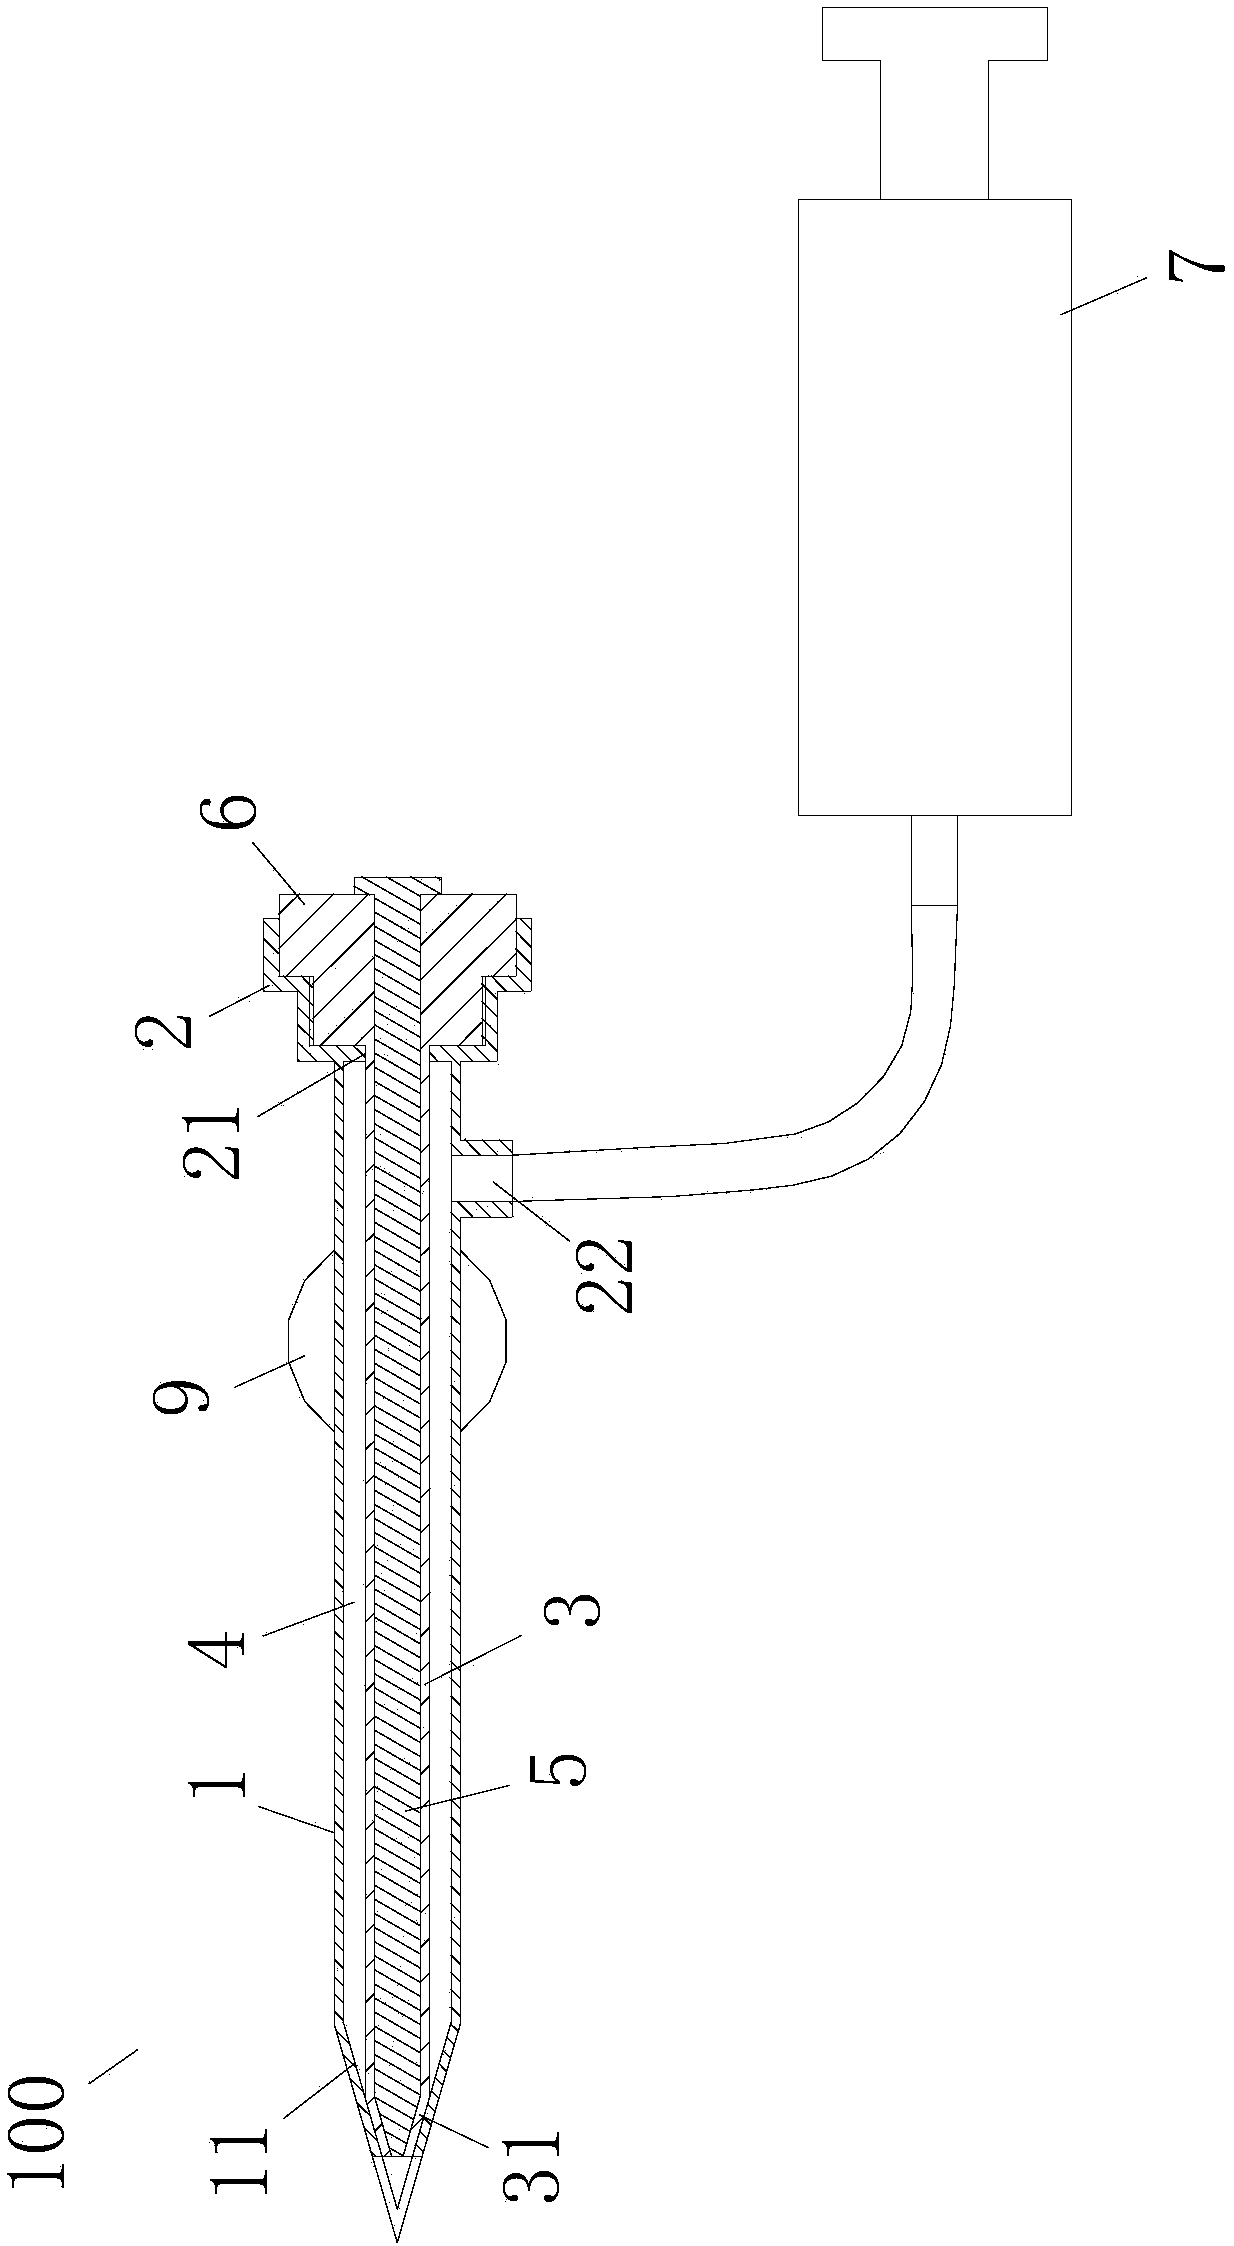 Medical equipment for auripuncture and intratympanic injection